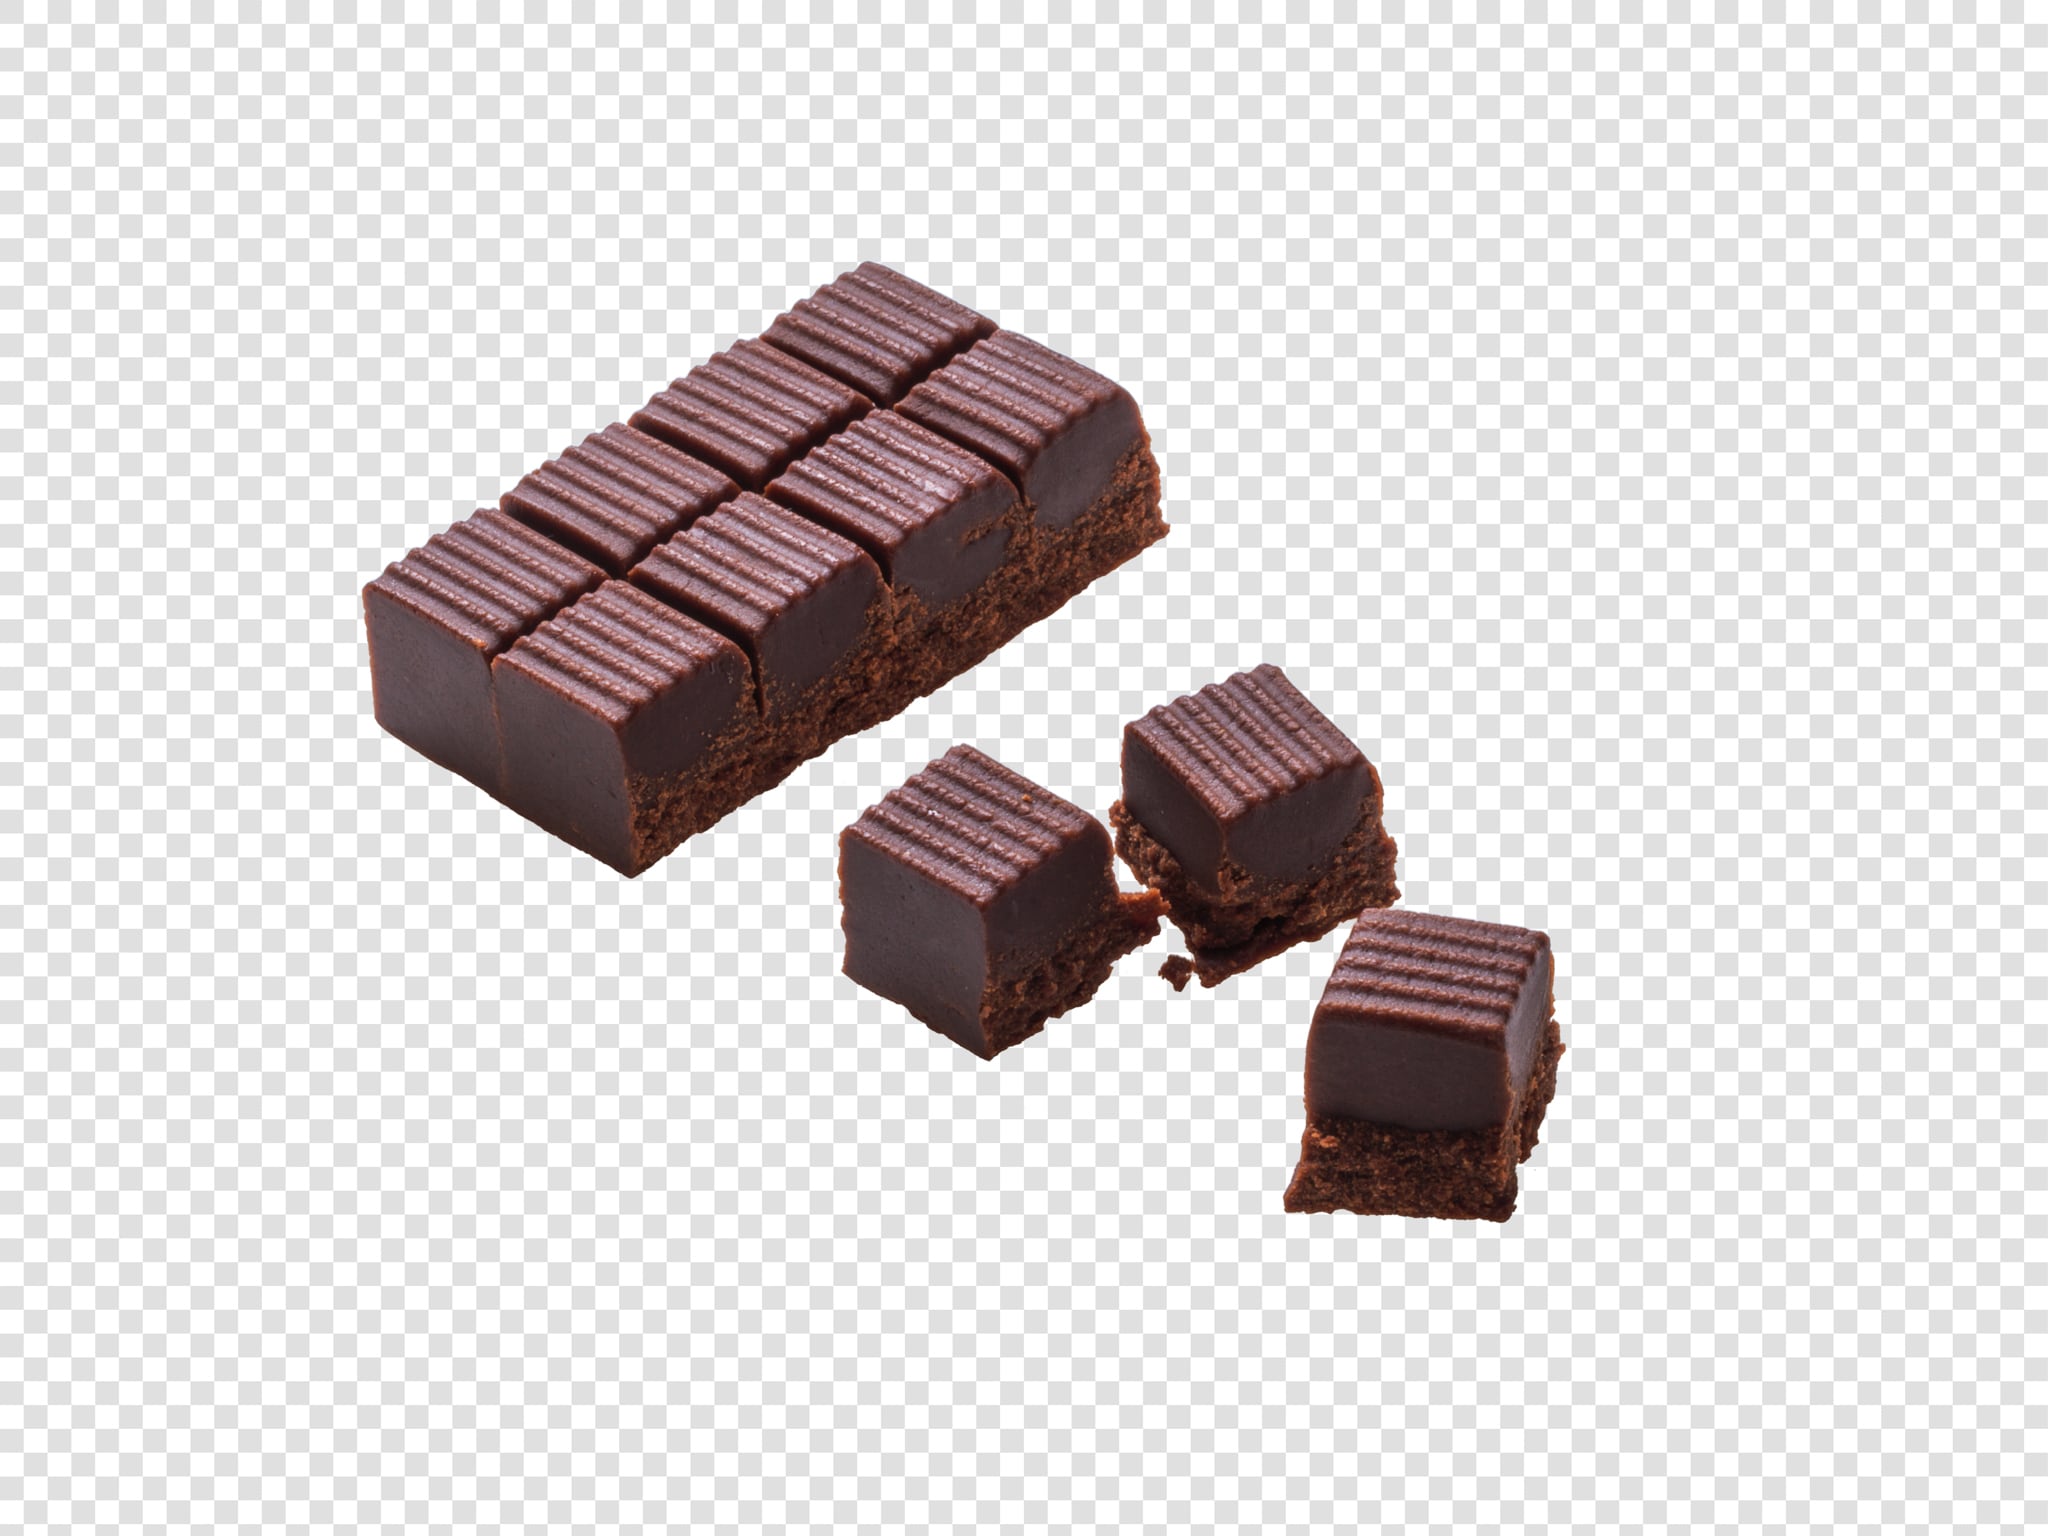 Chocolate PSD image with transparent background